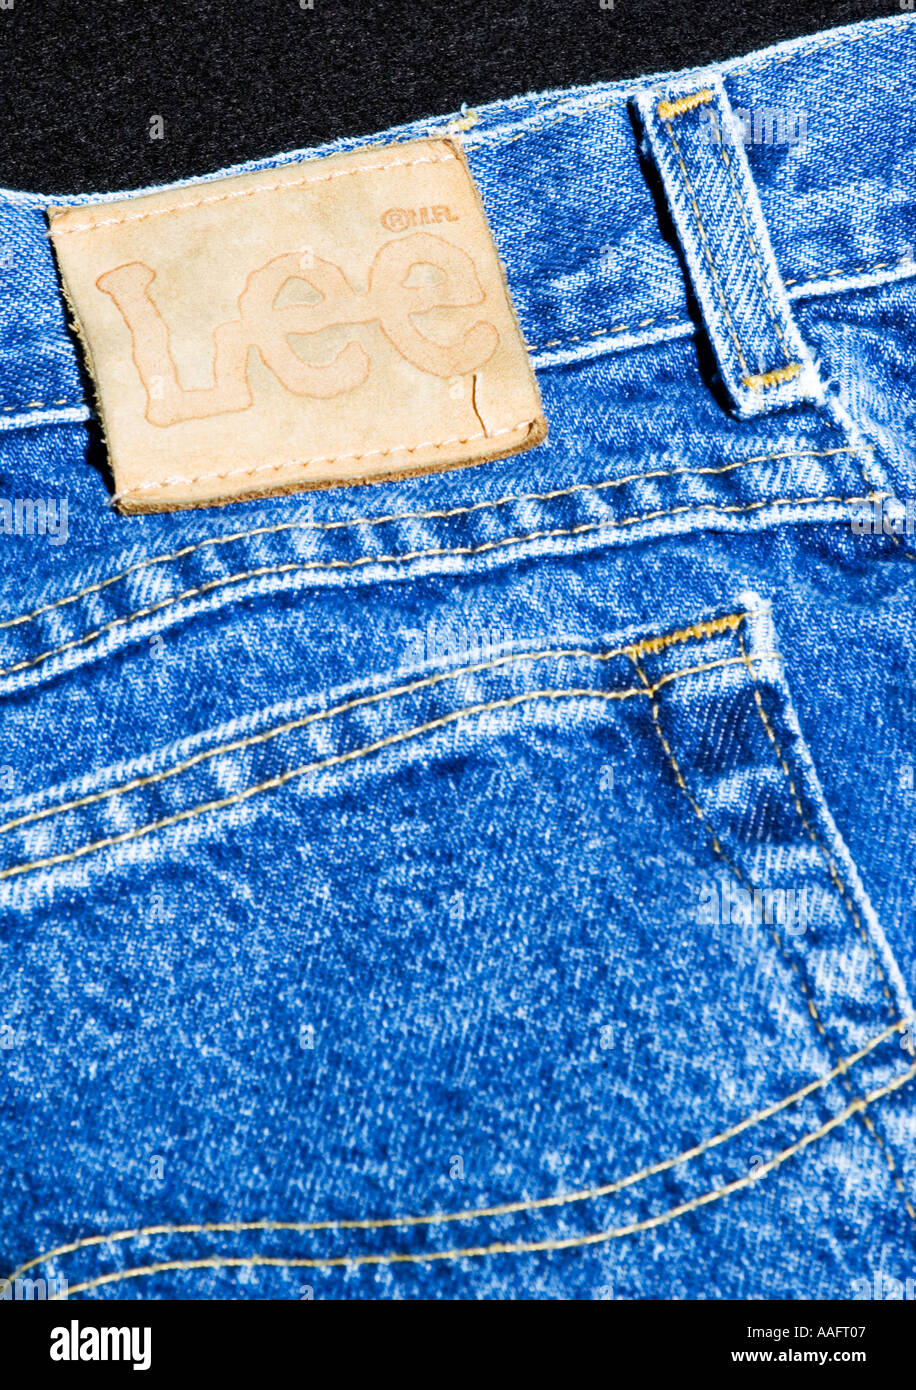 Lee Brand Blue Jeans USA Stock